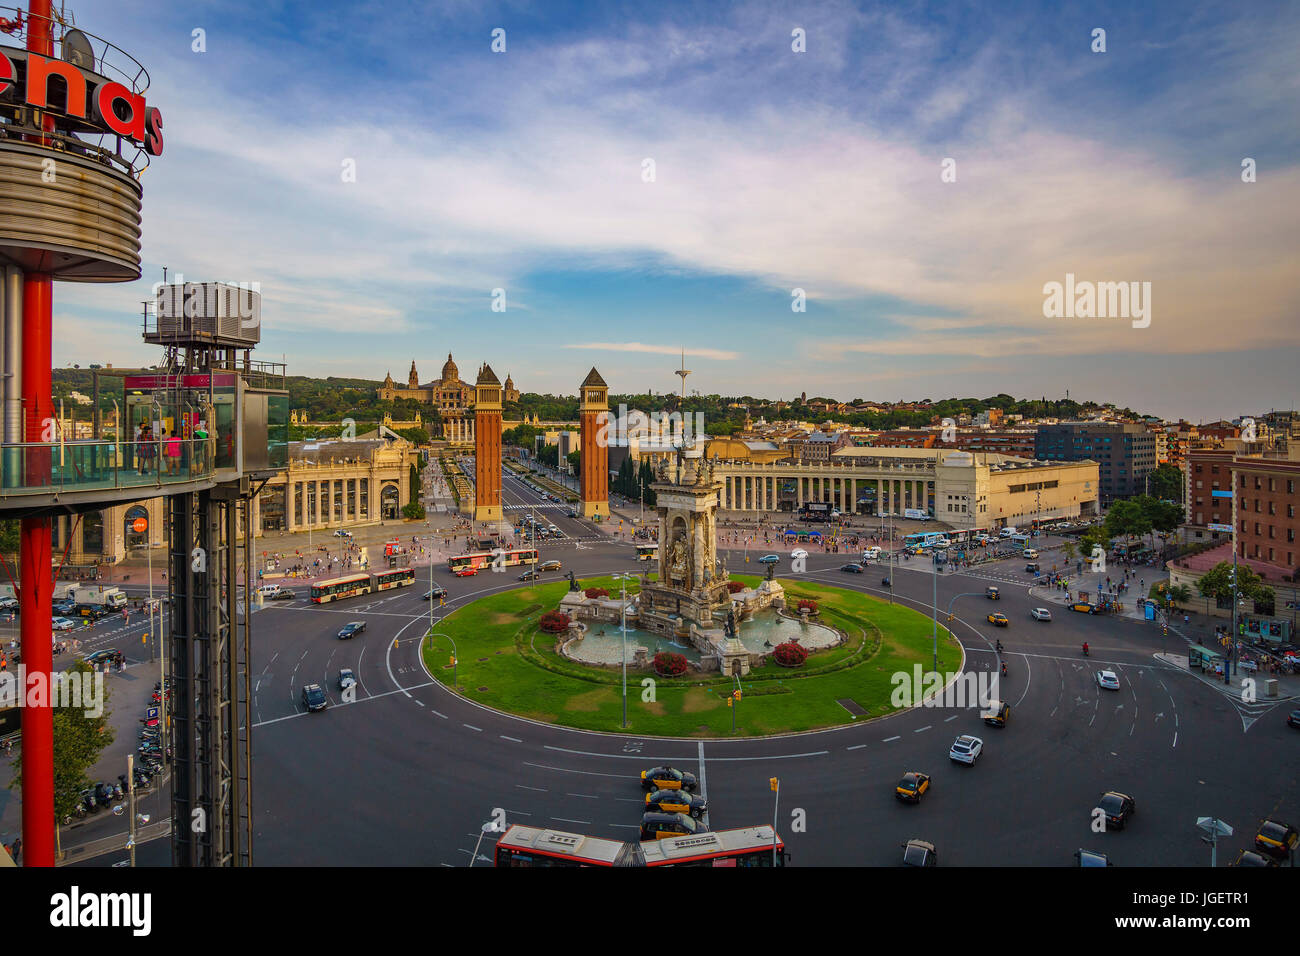 Placa d'Espanya, also known as Plaza de Espana, is one of Barcelona's most important squares, built on the occasion of the 1929 International Exhibiti Stock Photo